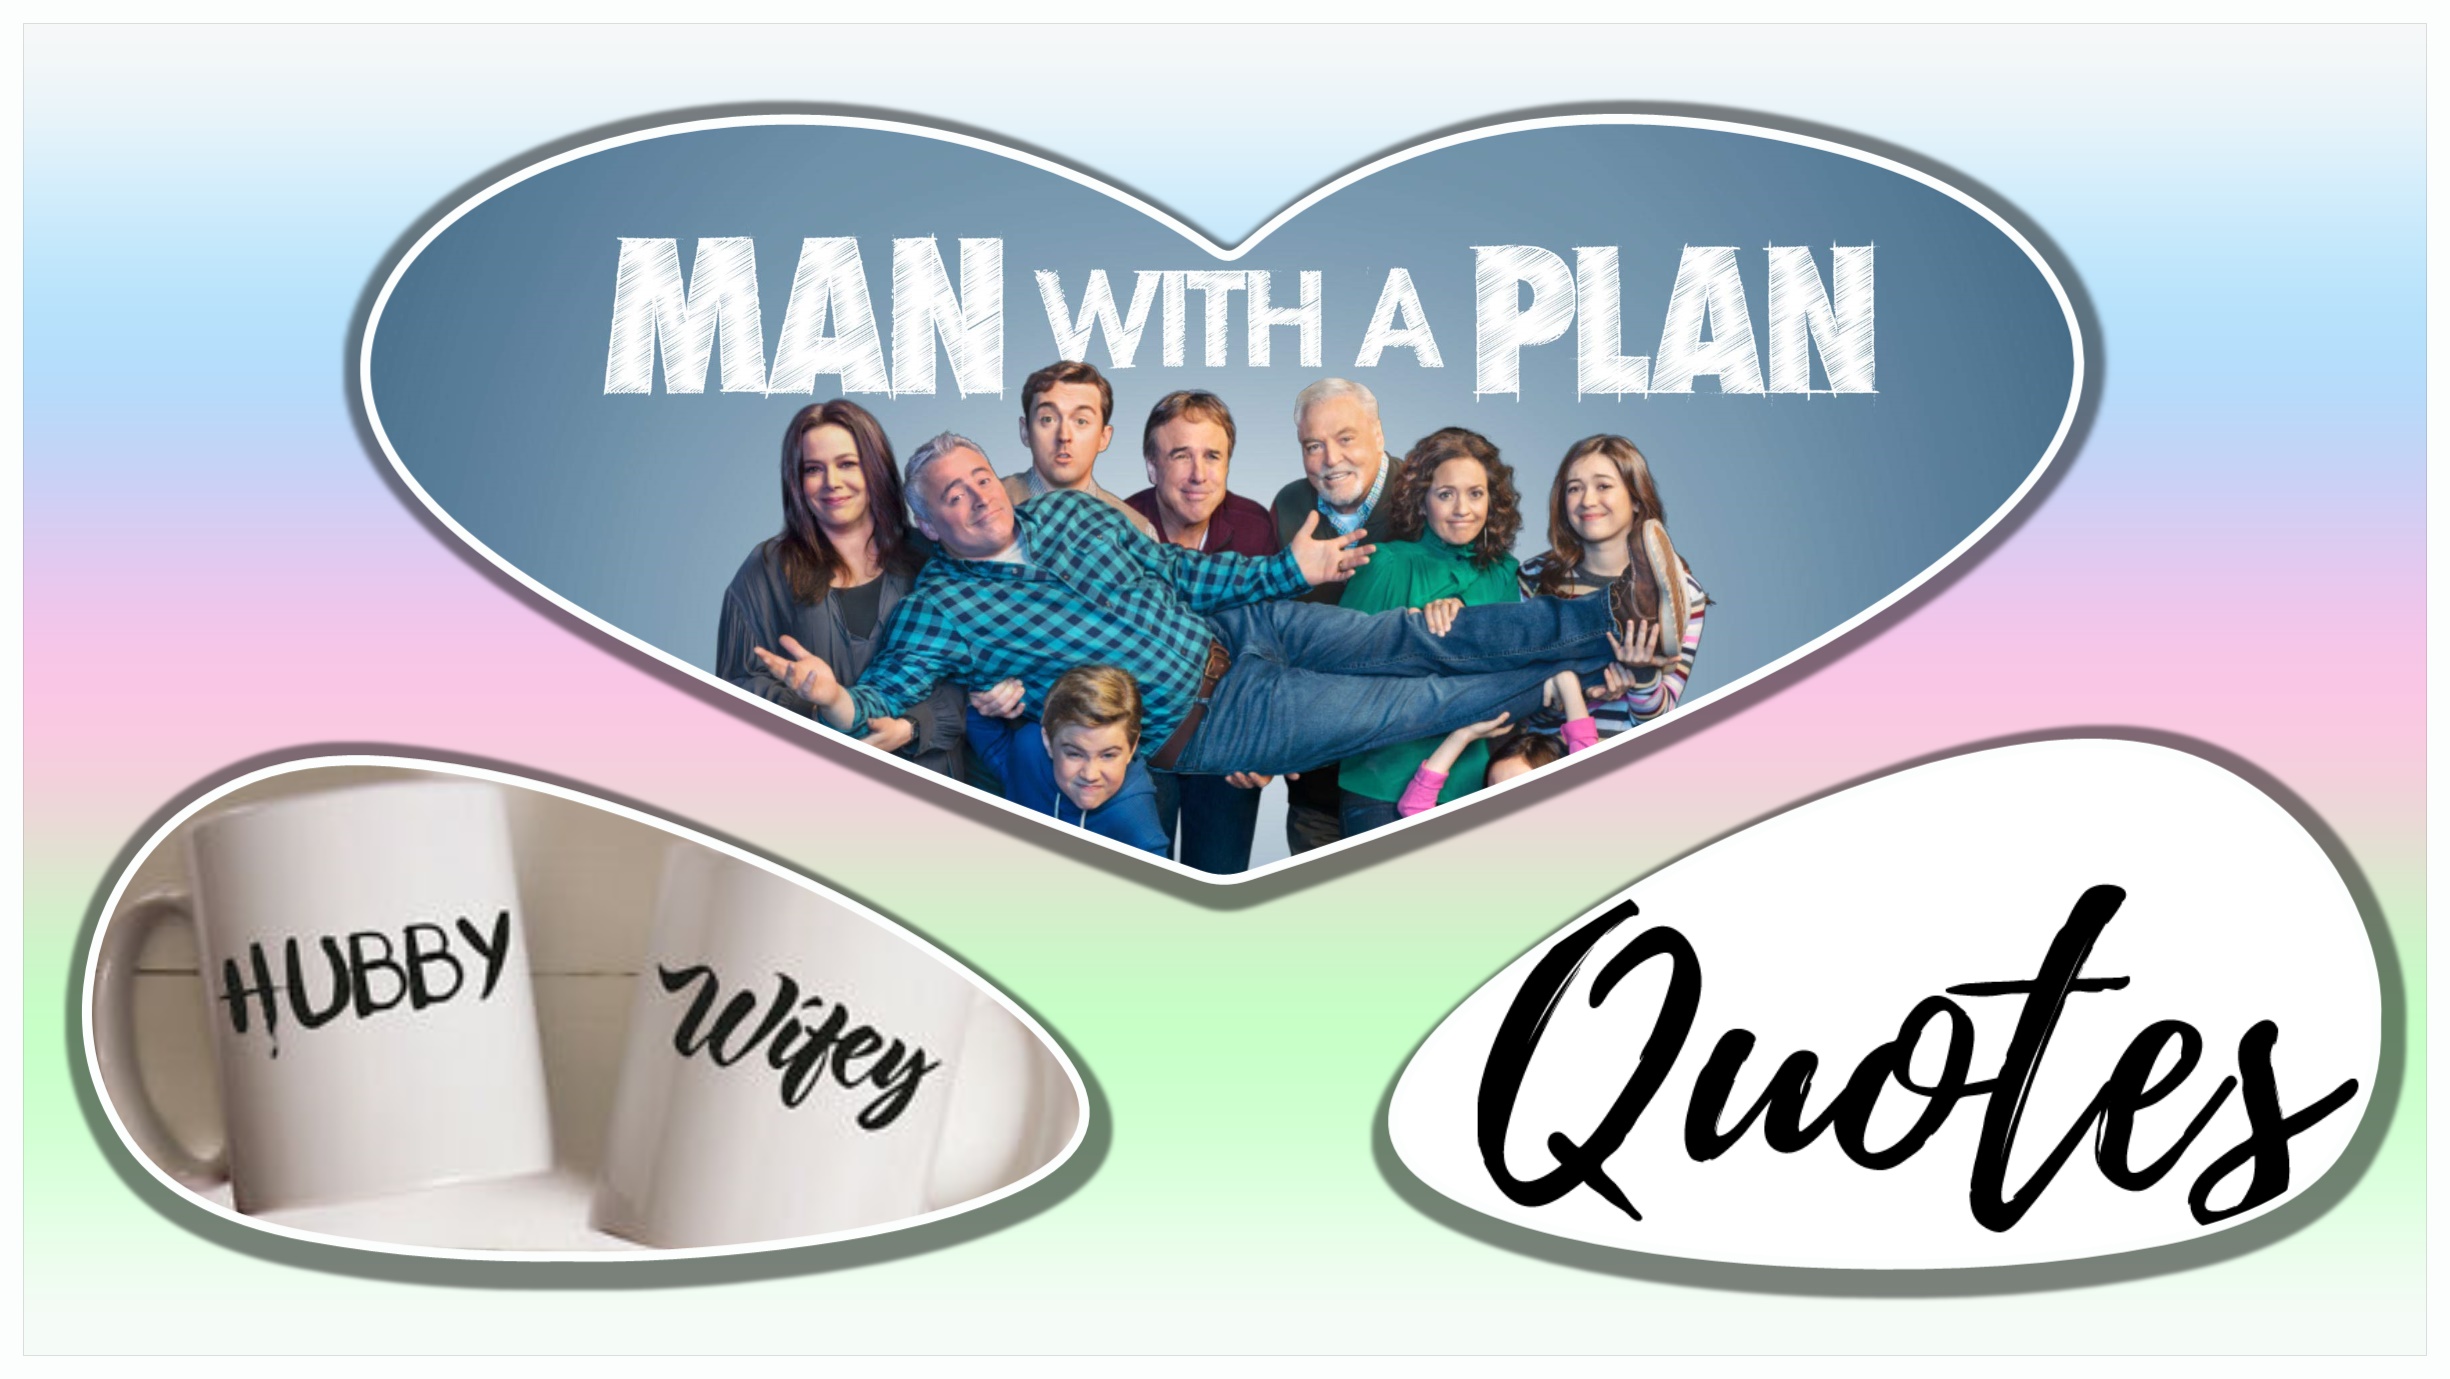 Man with a Plan TV Show - Husband quotes for Wife